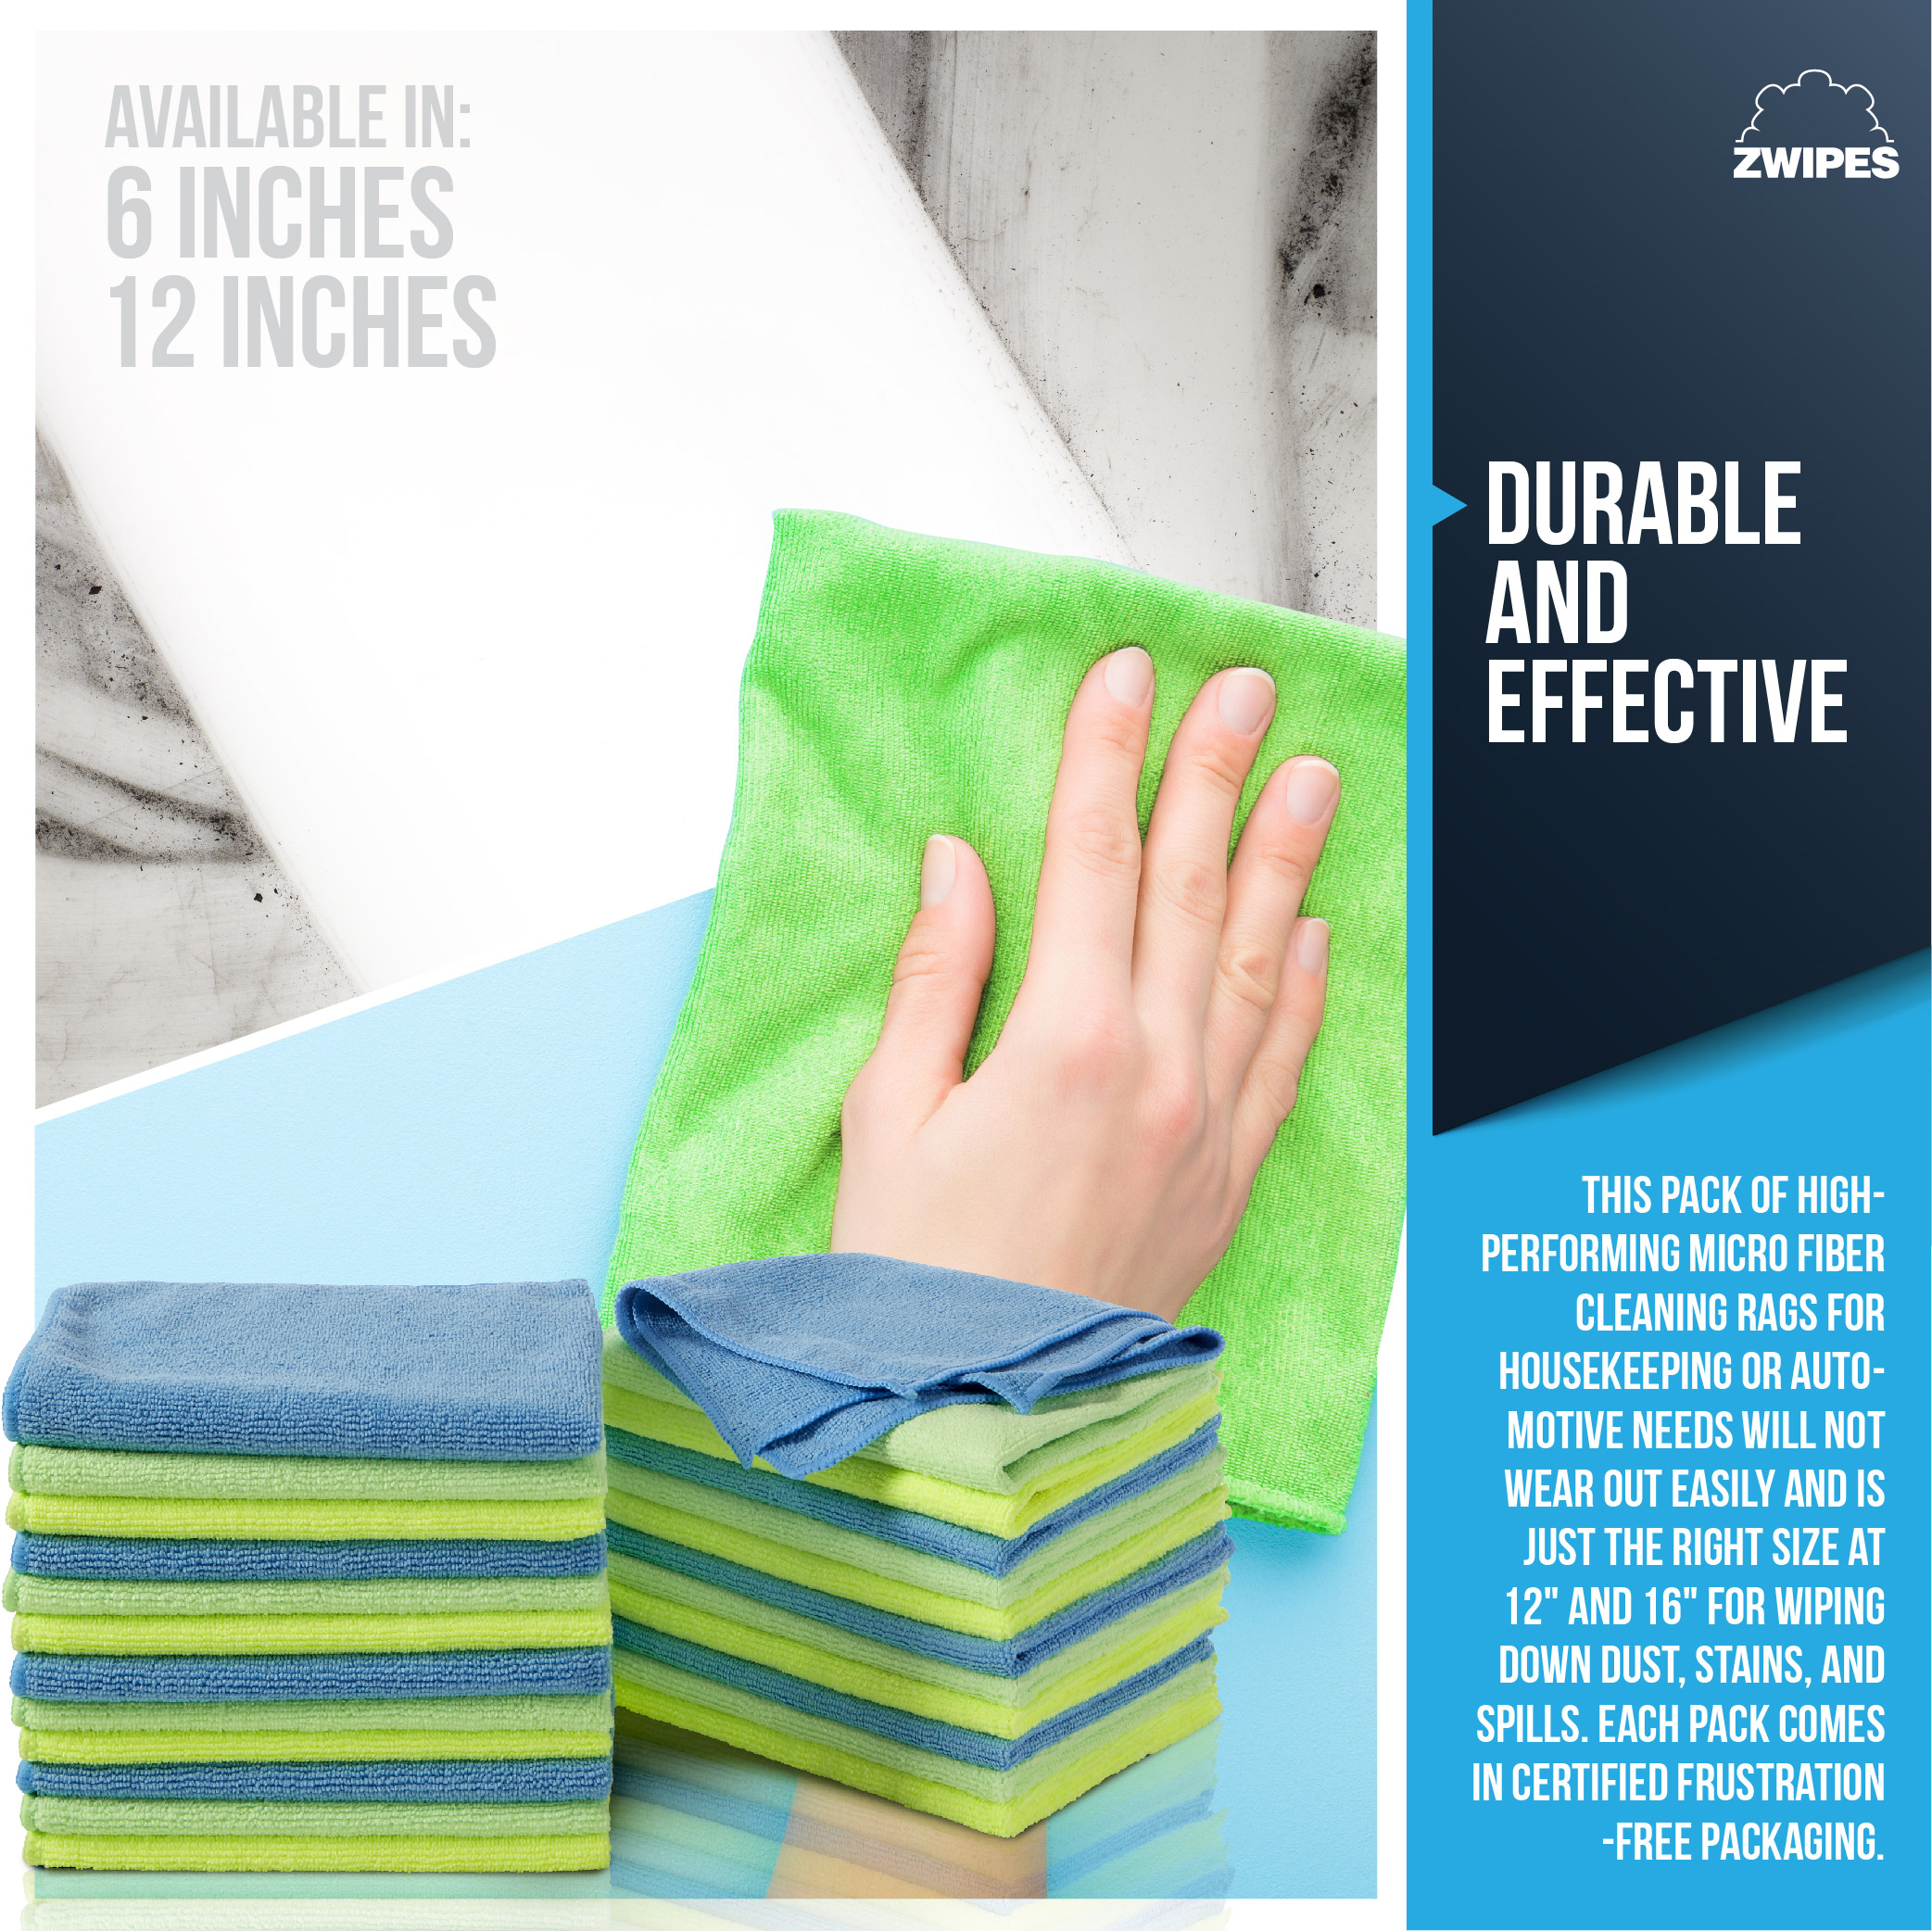 Zwipes Microfiber Cleaning Cloths, Multicolor, 12 Pack - image 9 of 13